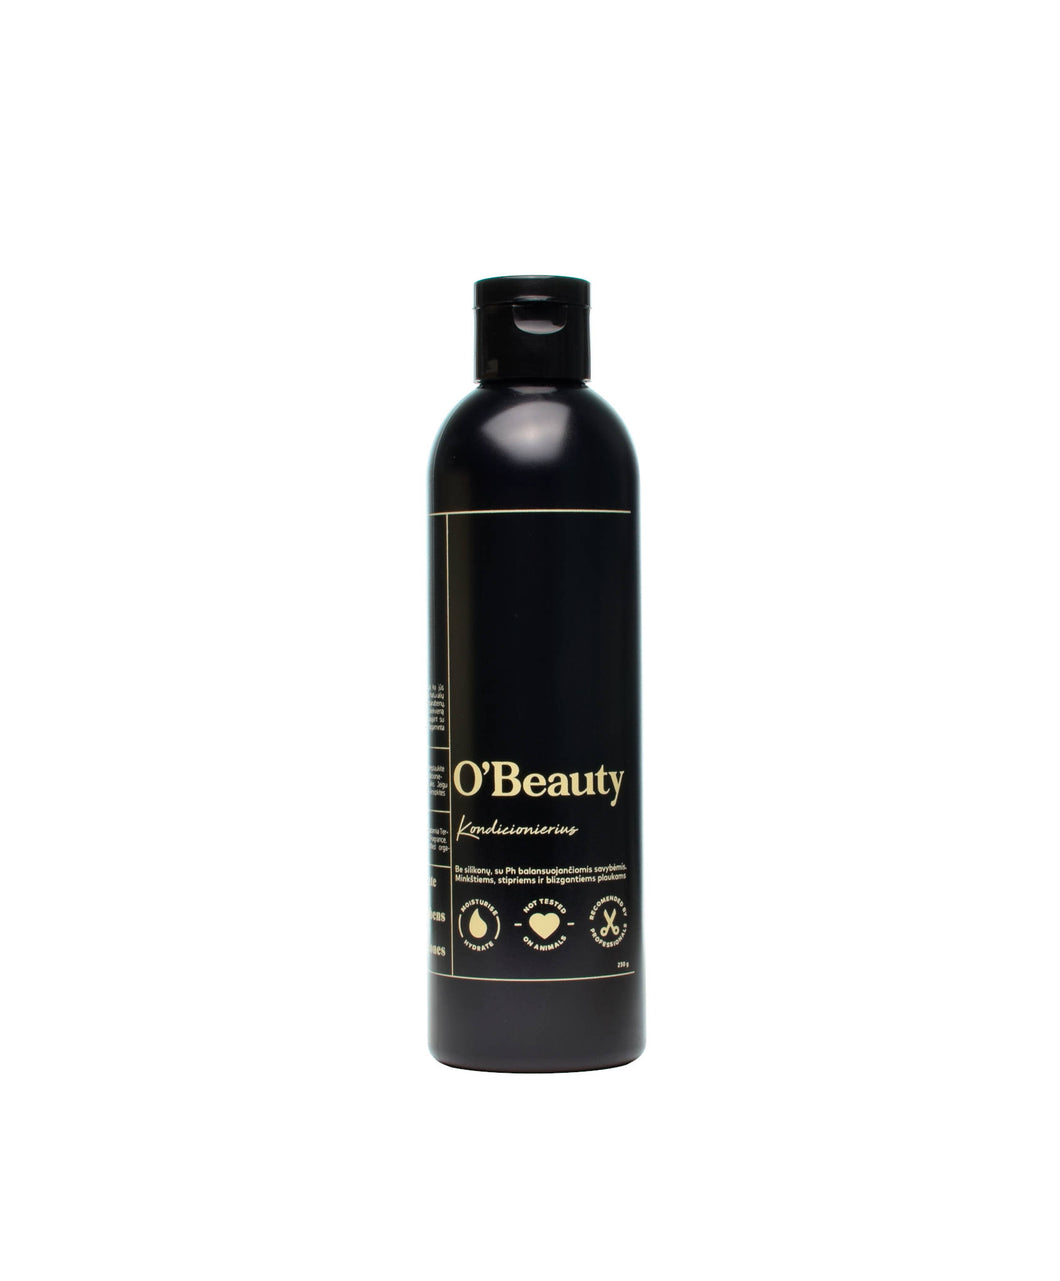 O'Beauty conditioner, 230g